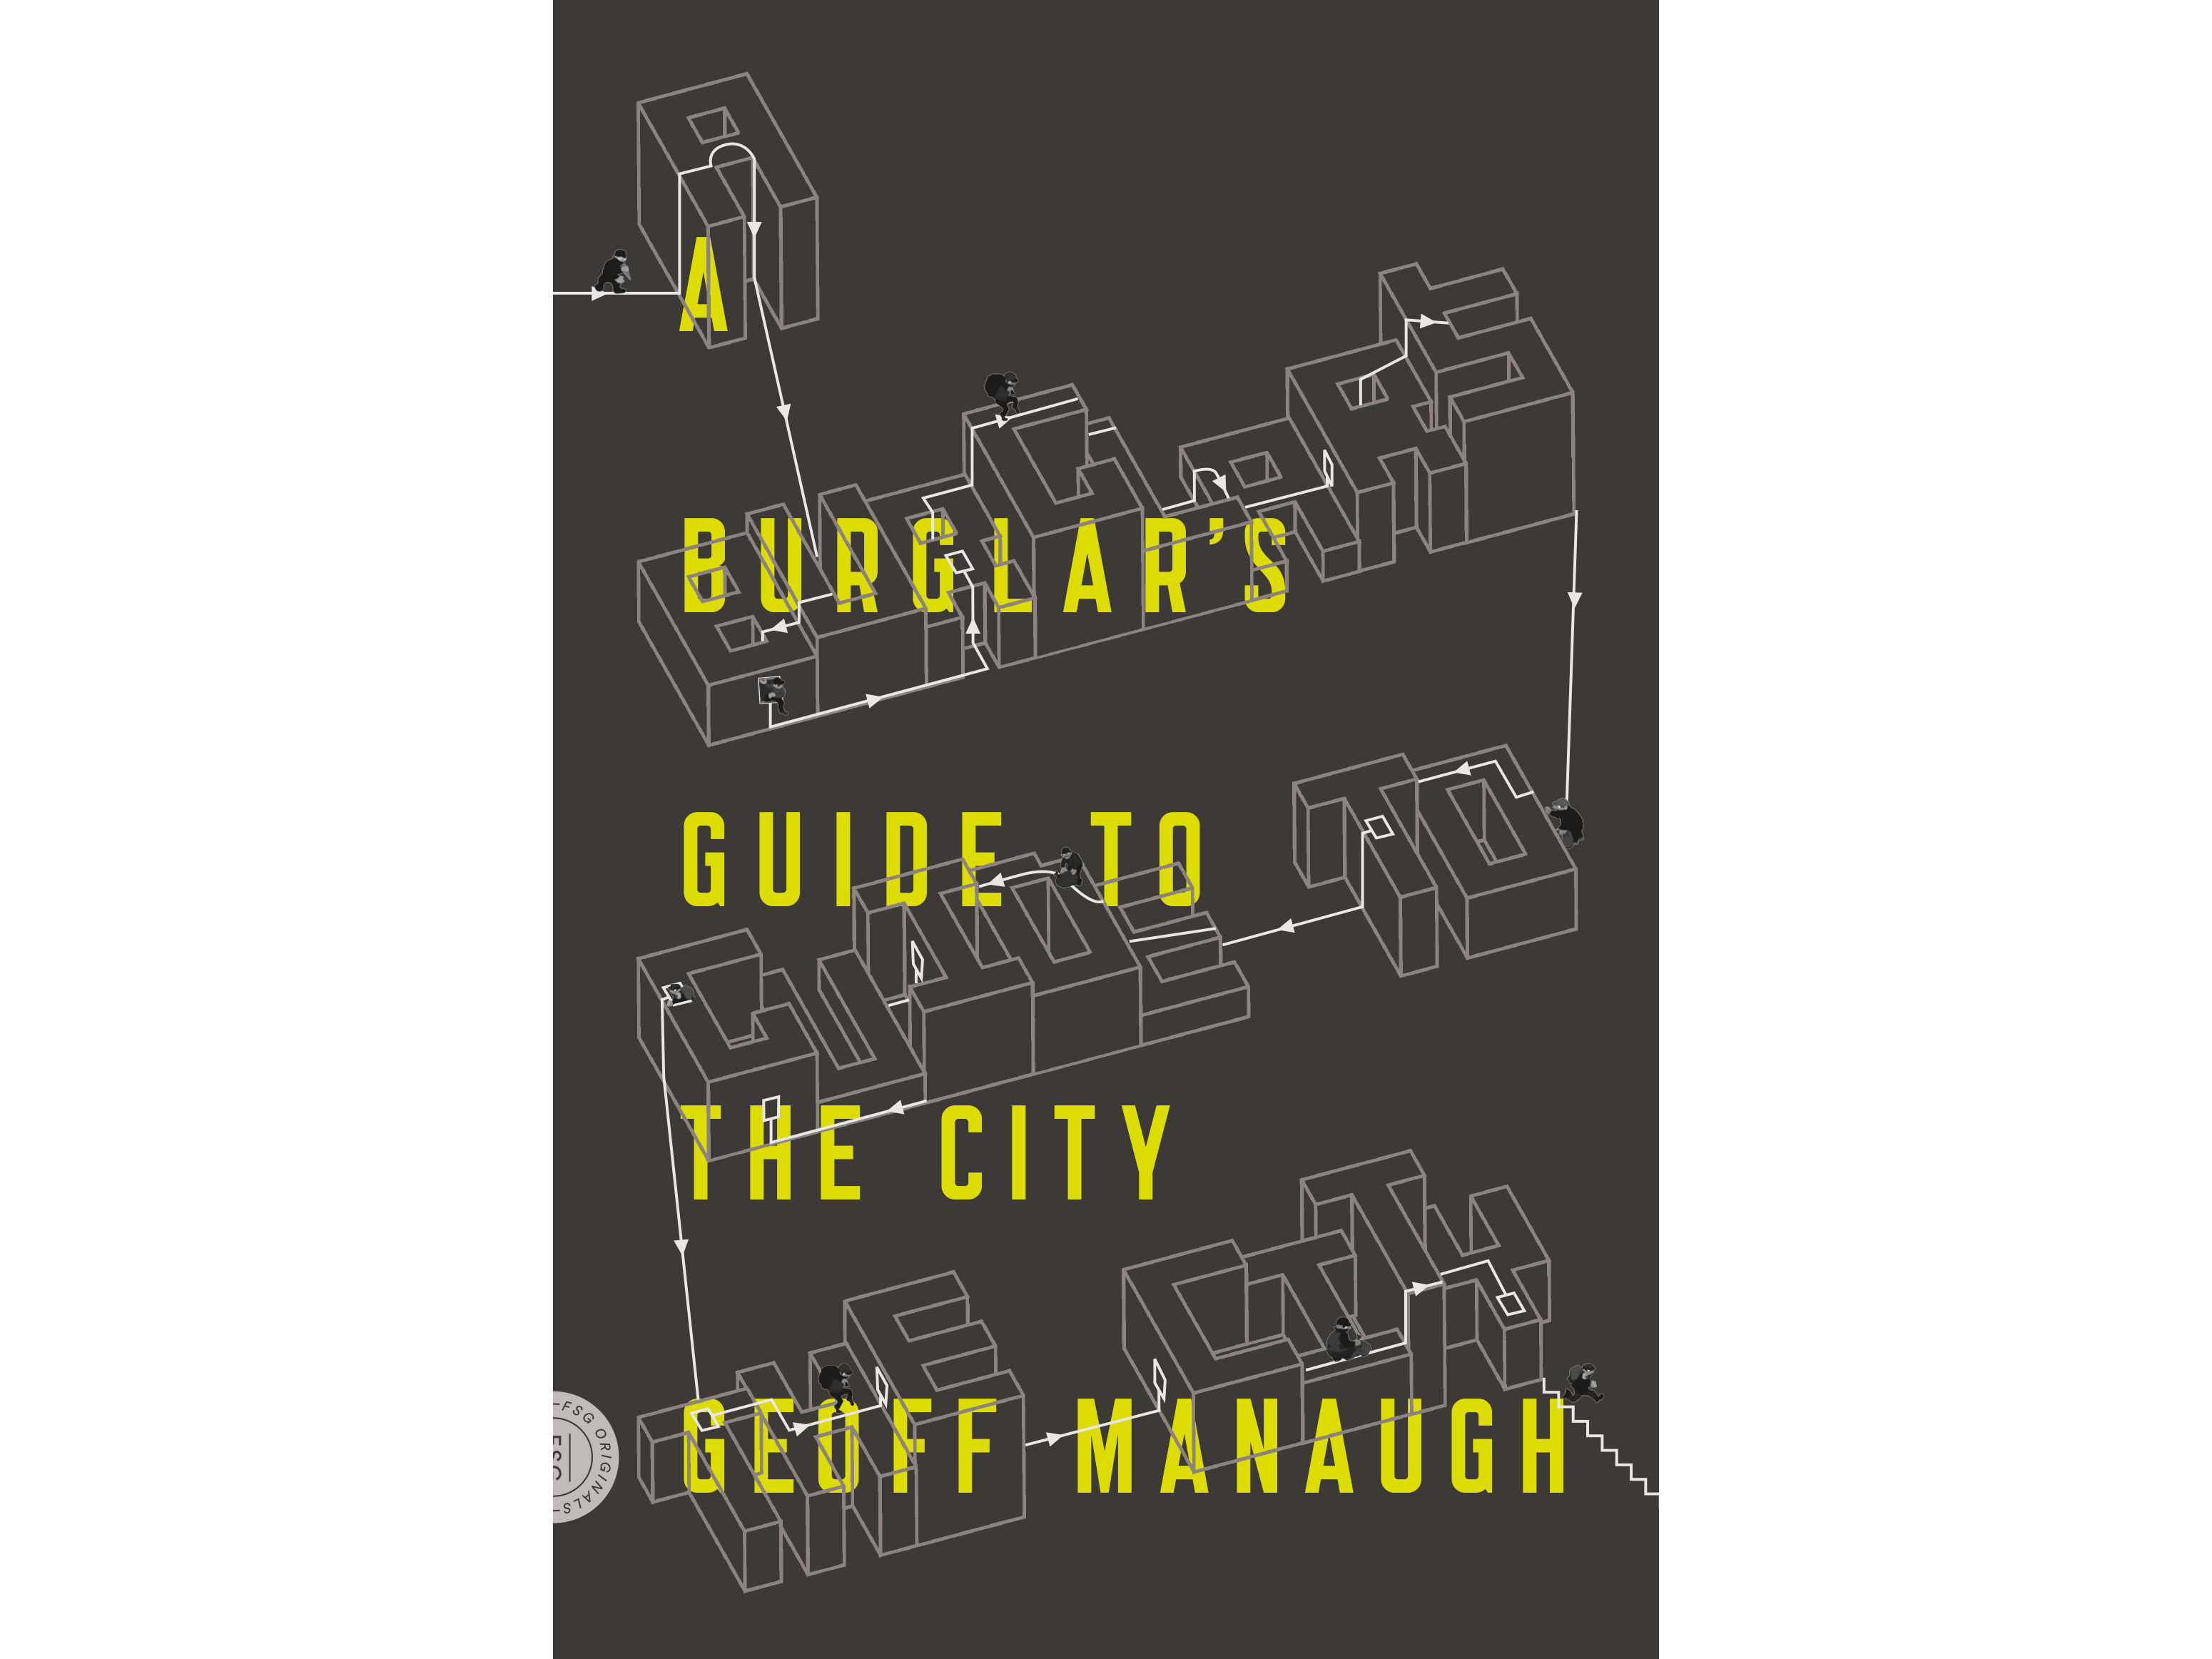 Oculus Book Review: A Burglar’s Guide to the City by Geoff Manaugh